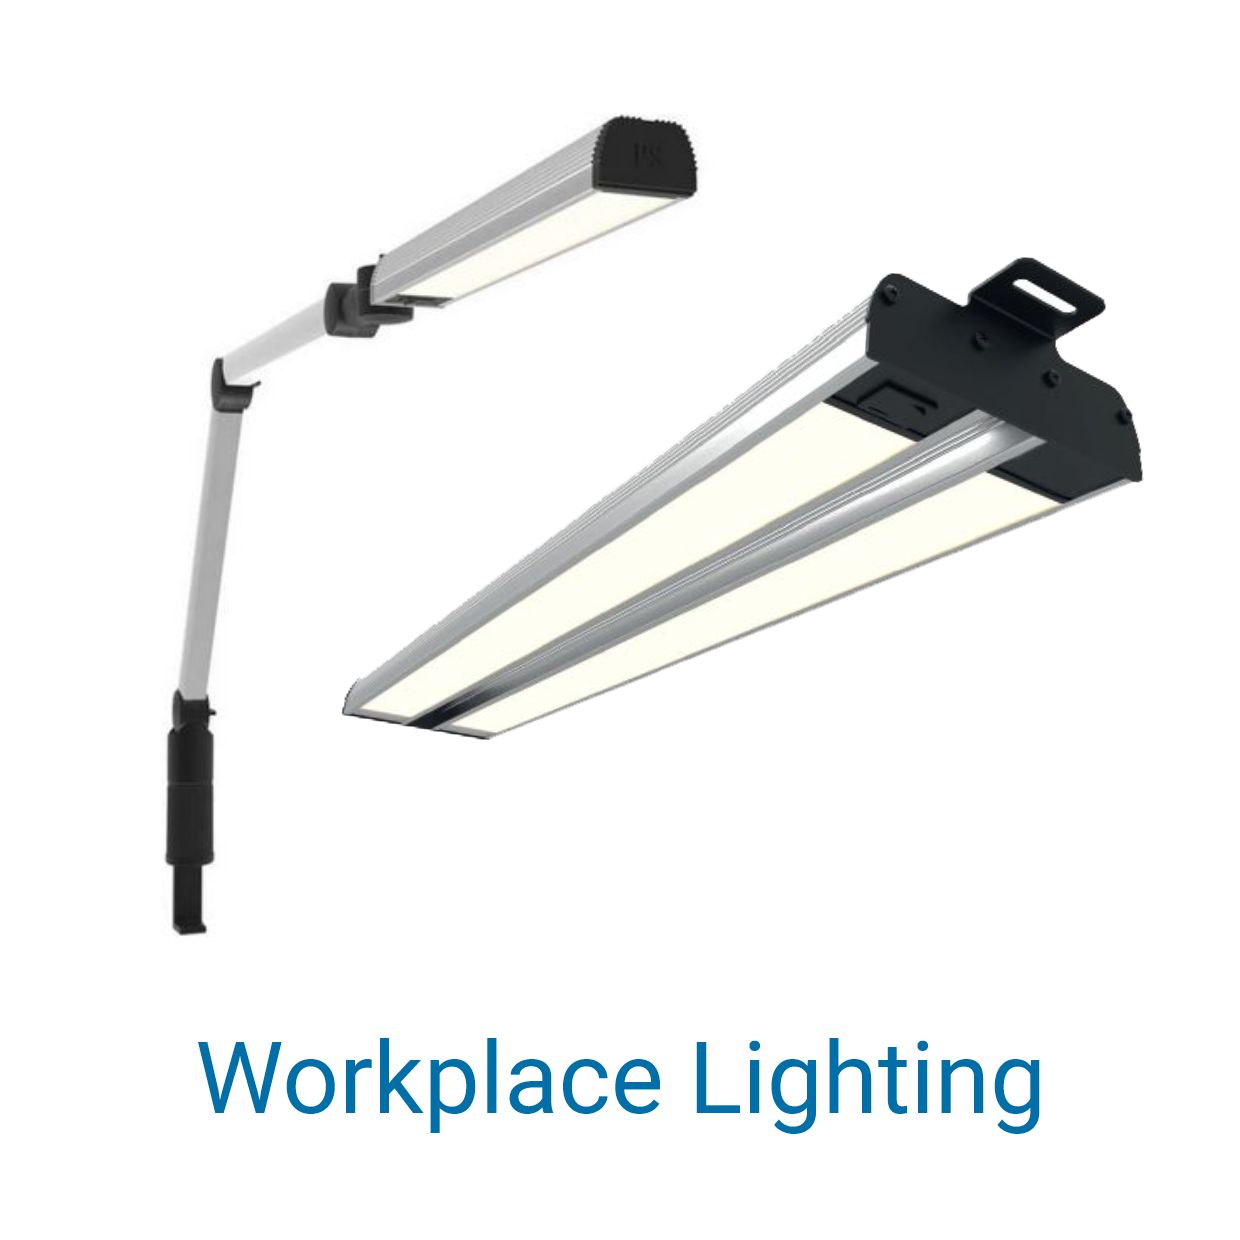 LED workplace lighting (BEEWATEC LED) from BeeWaTec